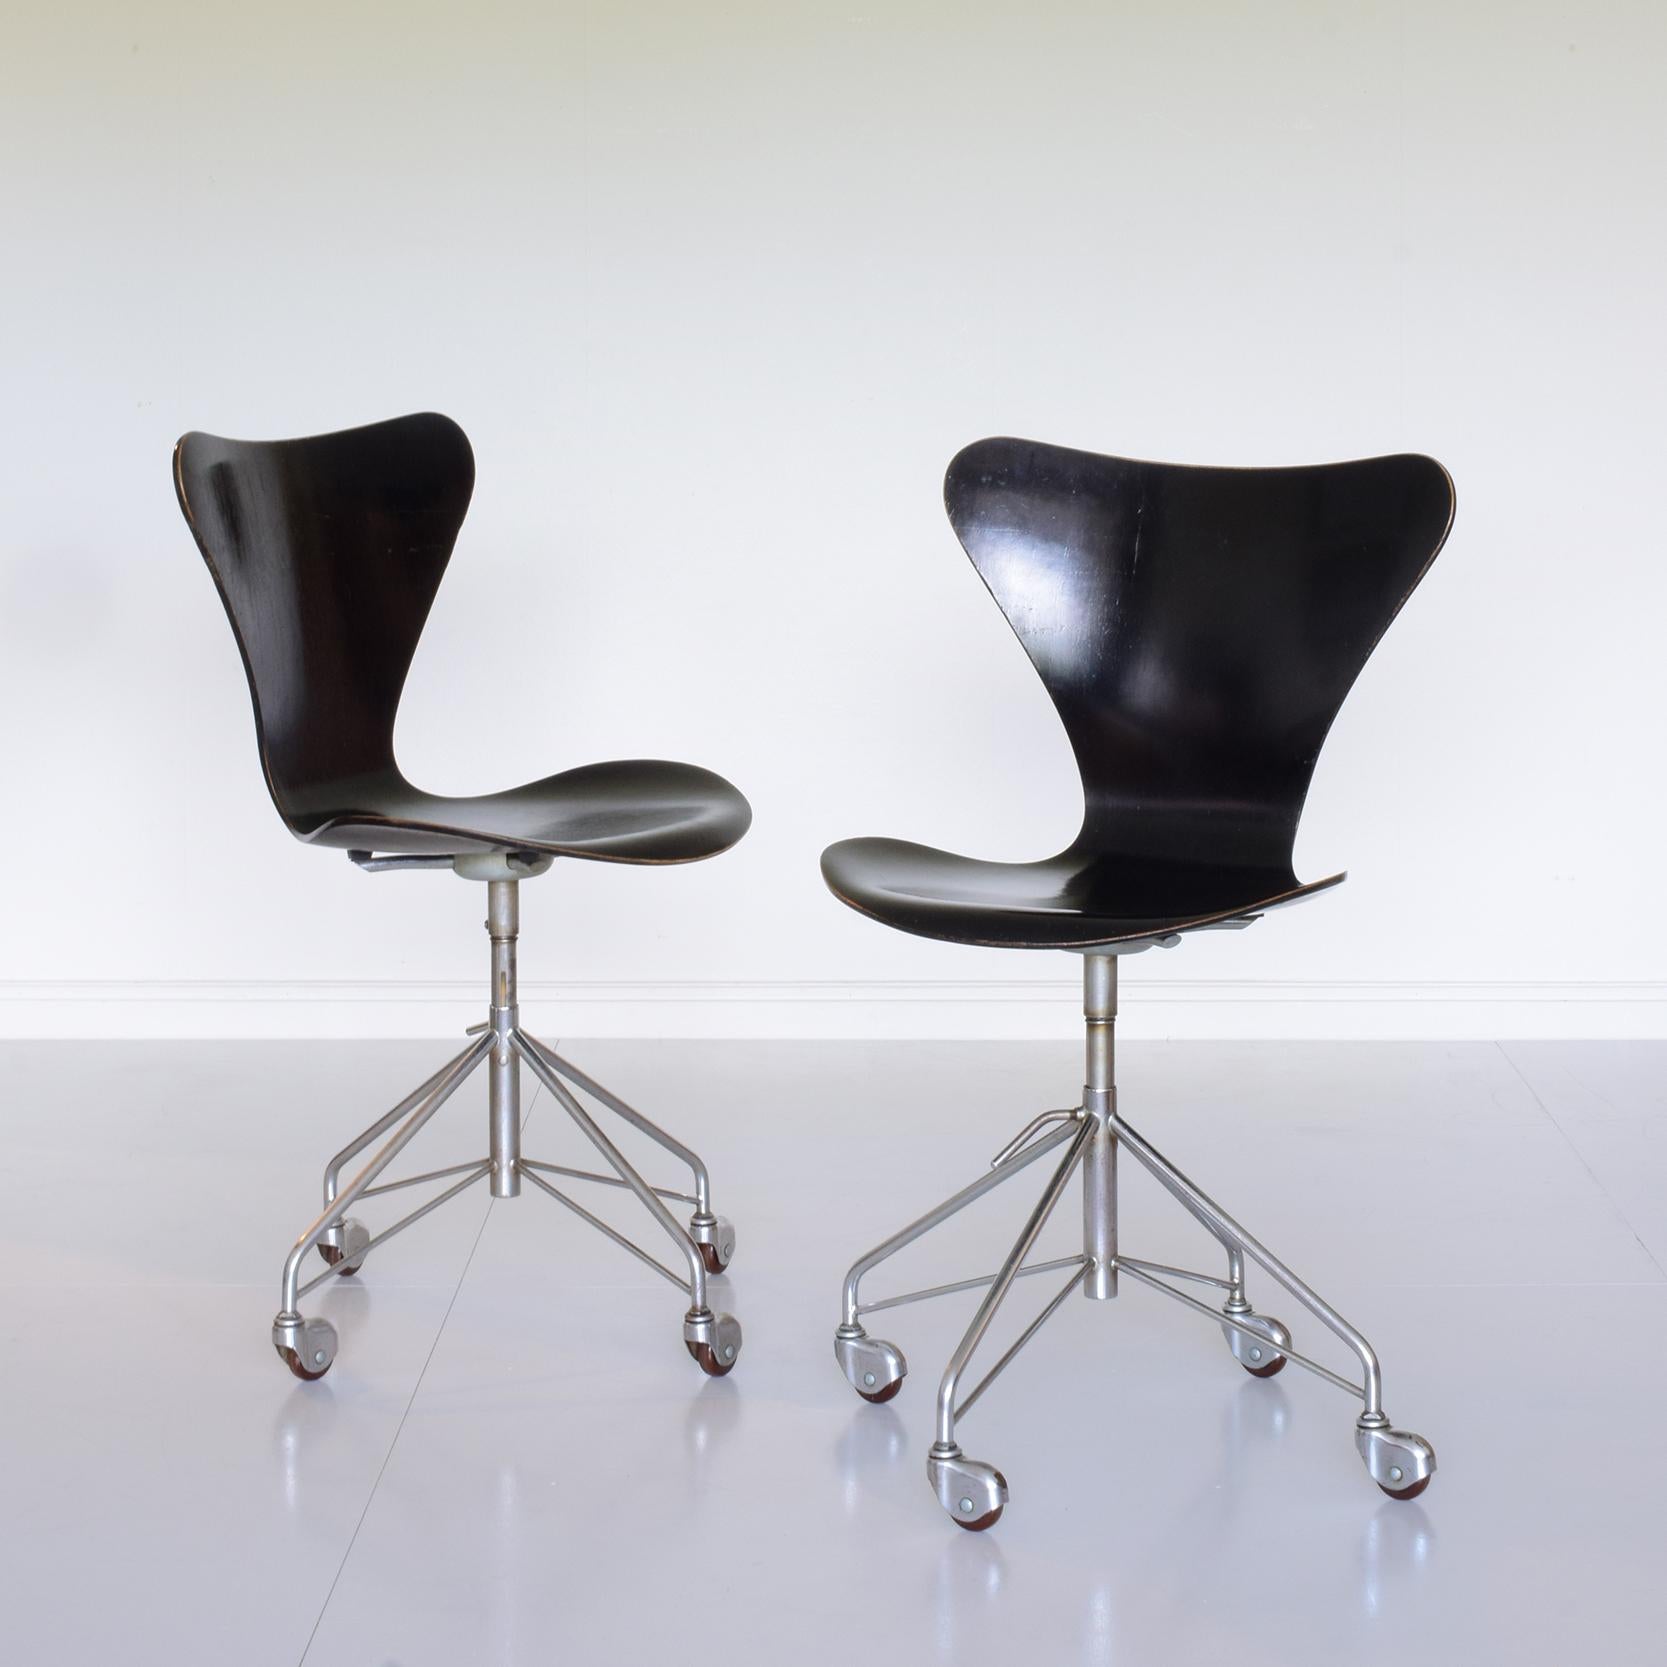 Molded Arne Jacobsen Model 3117 Adjustable Desk Work Chairs, 1955, Early Matching Pair For Sale